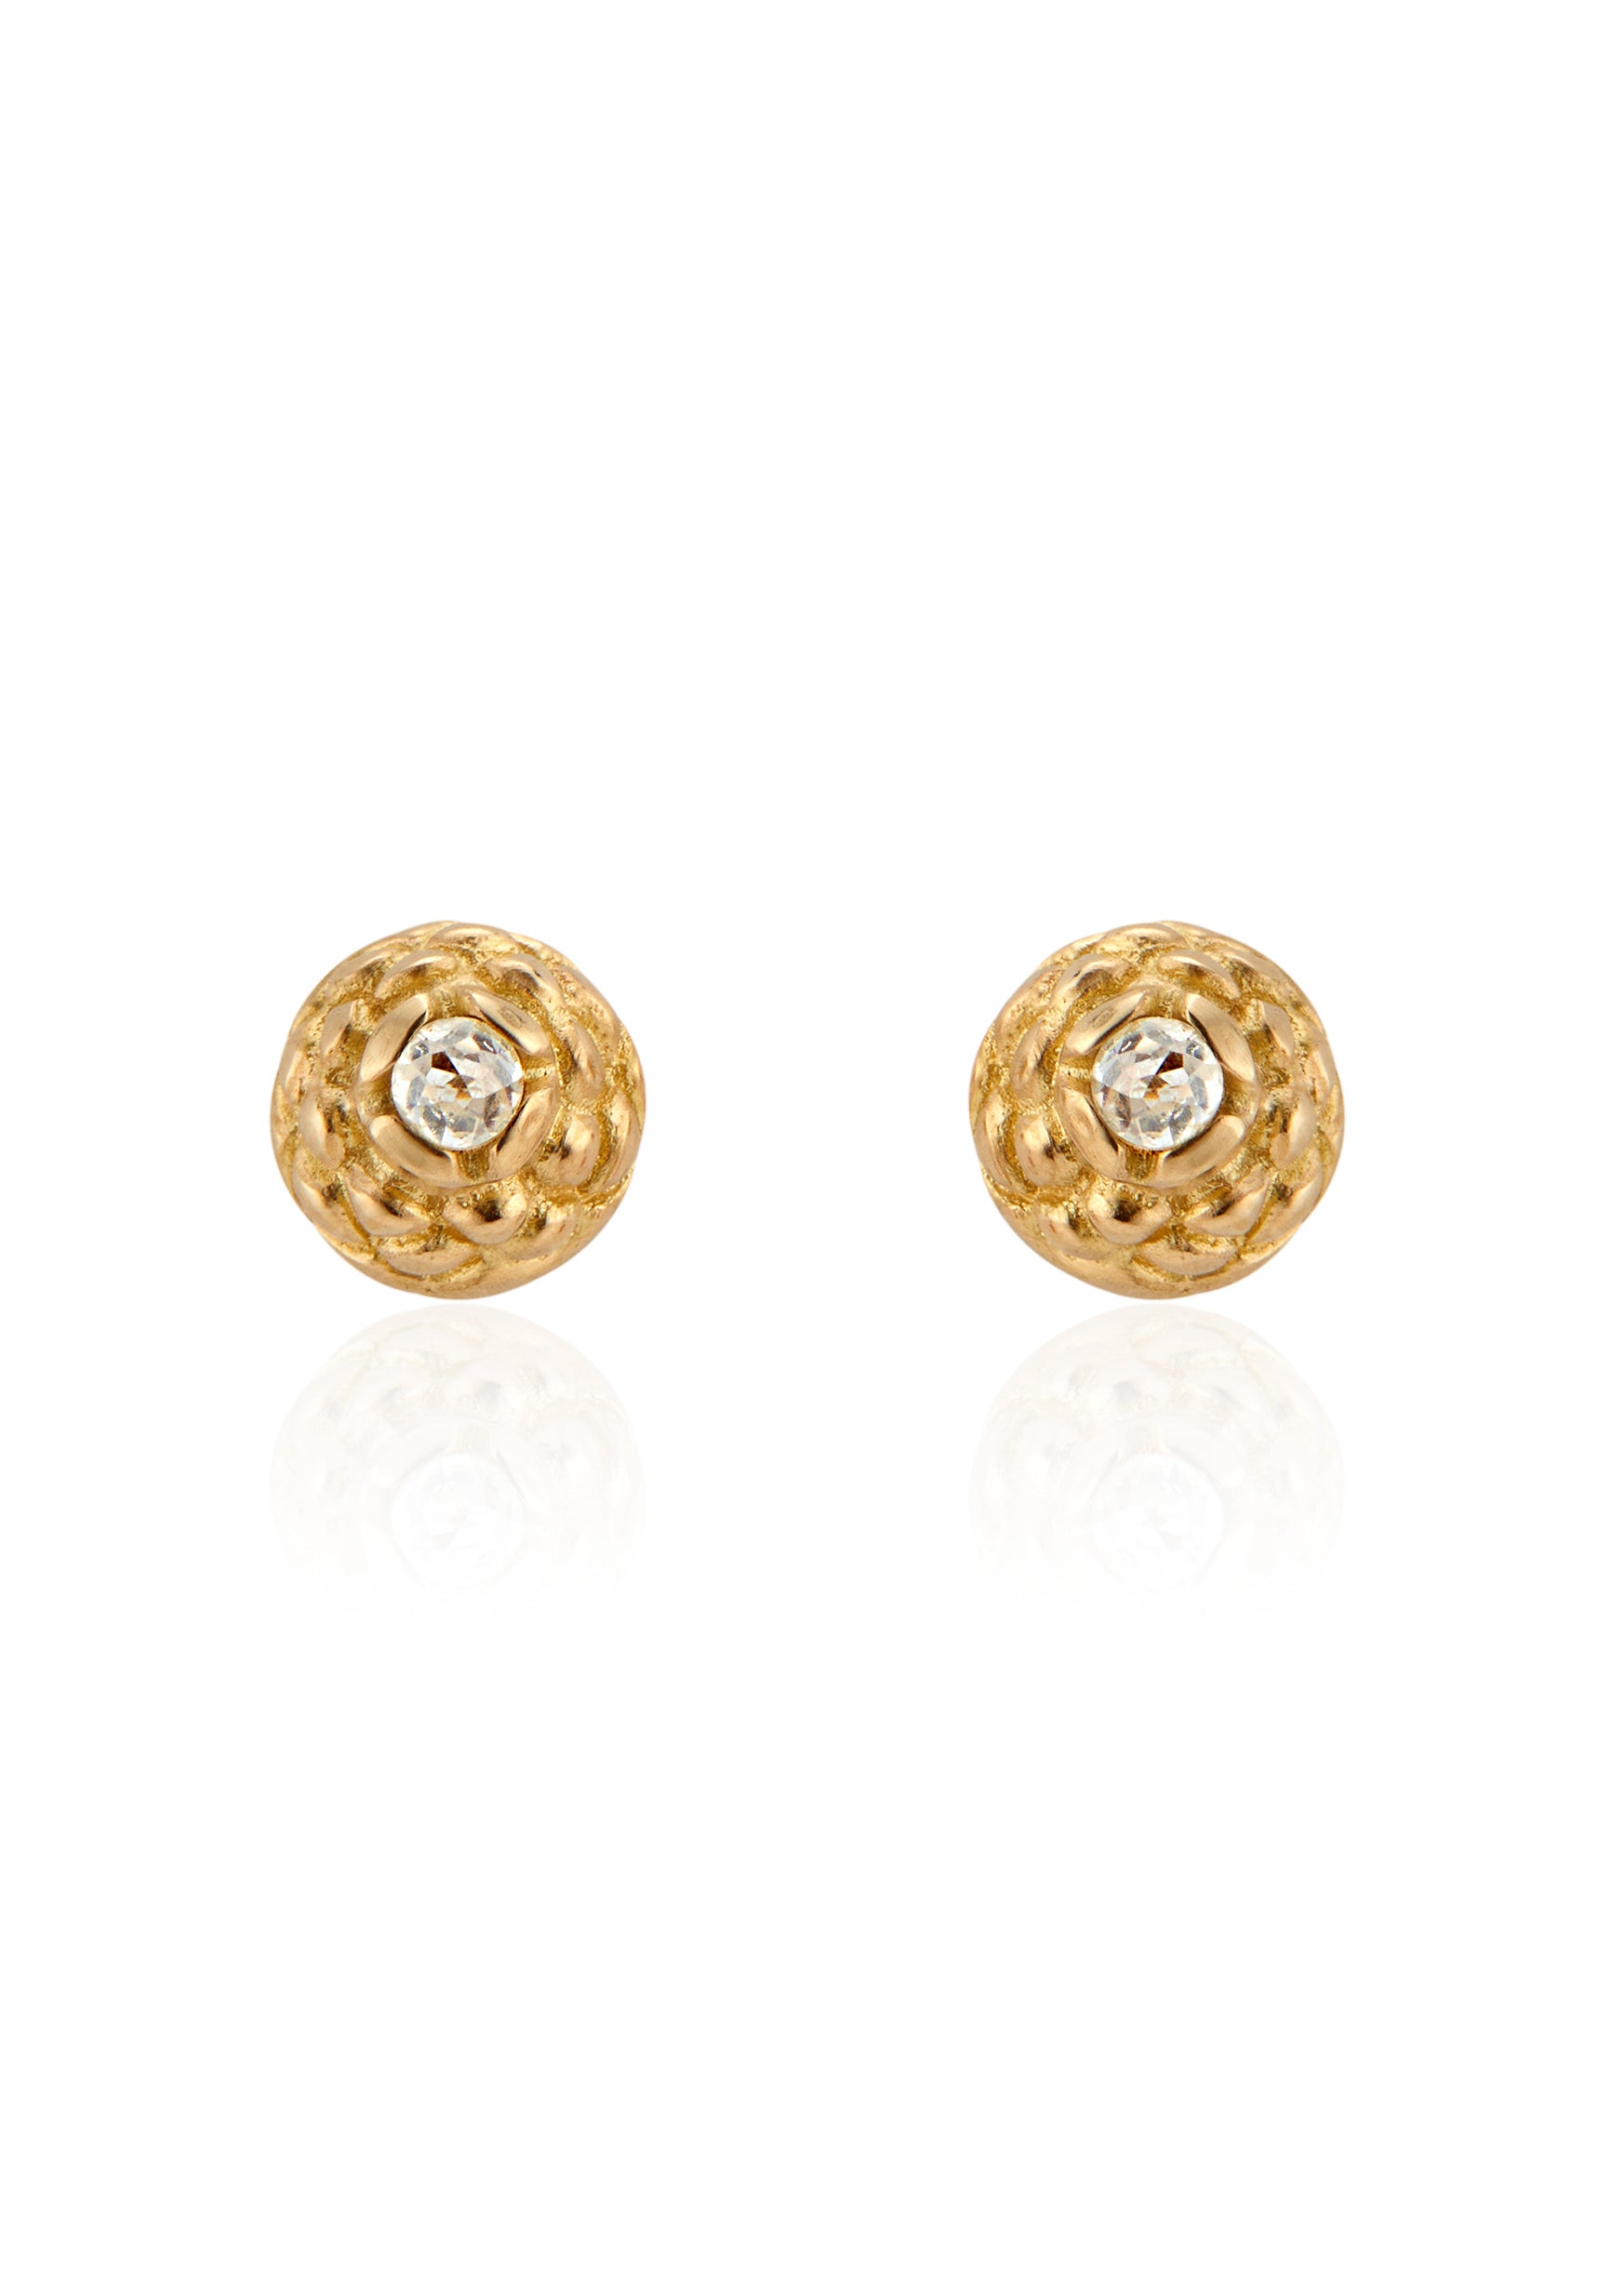 Featuring intricate hand-carved beads that center around brilliant rose cut diamonds, the Marquis earring is fit for royalty and reimagined for everyday wear. 